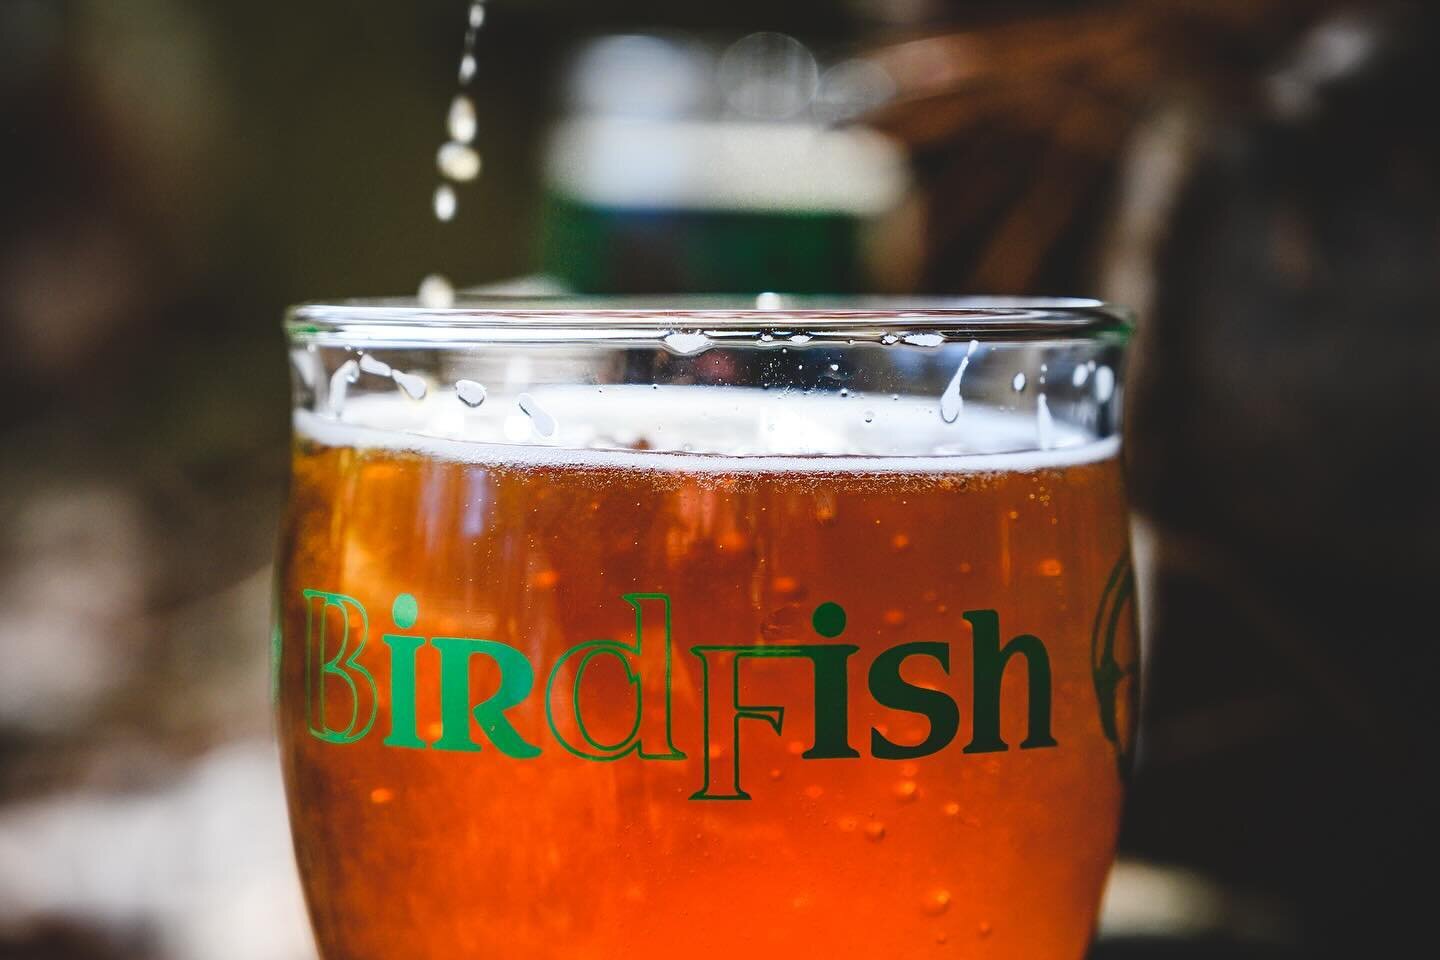 Everybody in the pub gettin&rsquo; tipsy ☘️

Harvey&rsquo;s Finest Irish Ale &amp; Folkin&rsquo; Ale Dry Irish Stout both on tap for our Saint Patrick&rsquo;s Day celebration this weekend. 

For complete event details including live music schedule, f